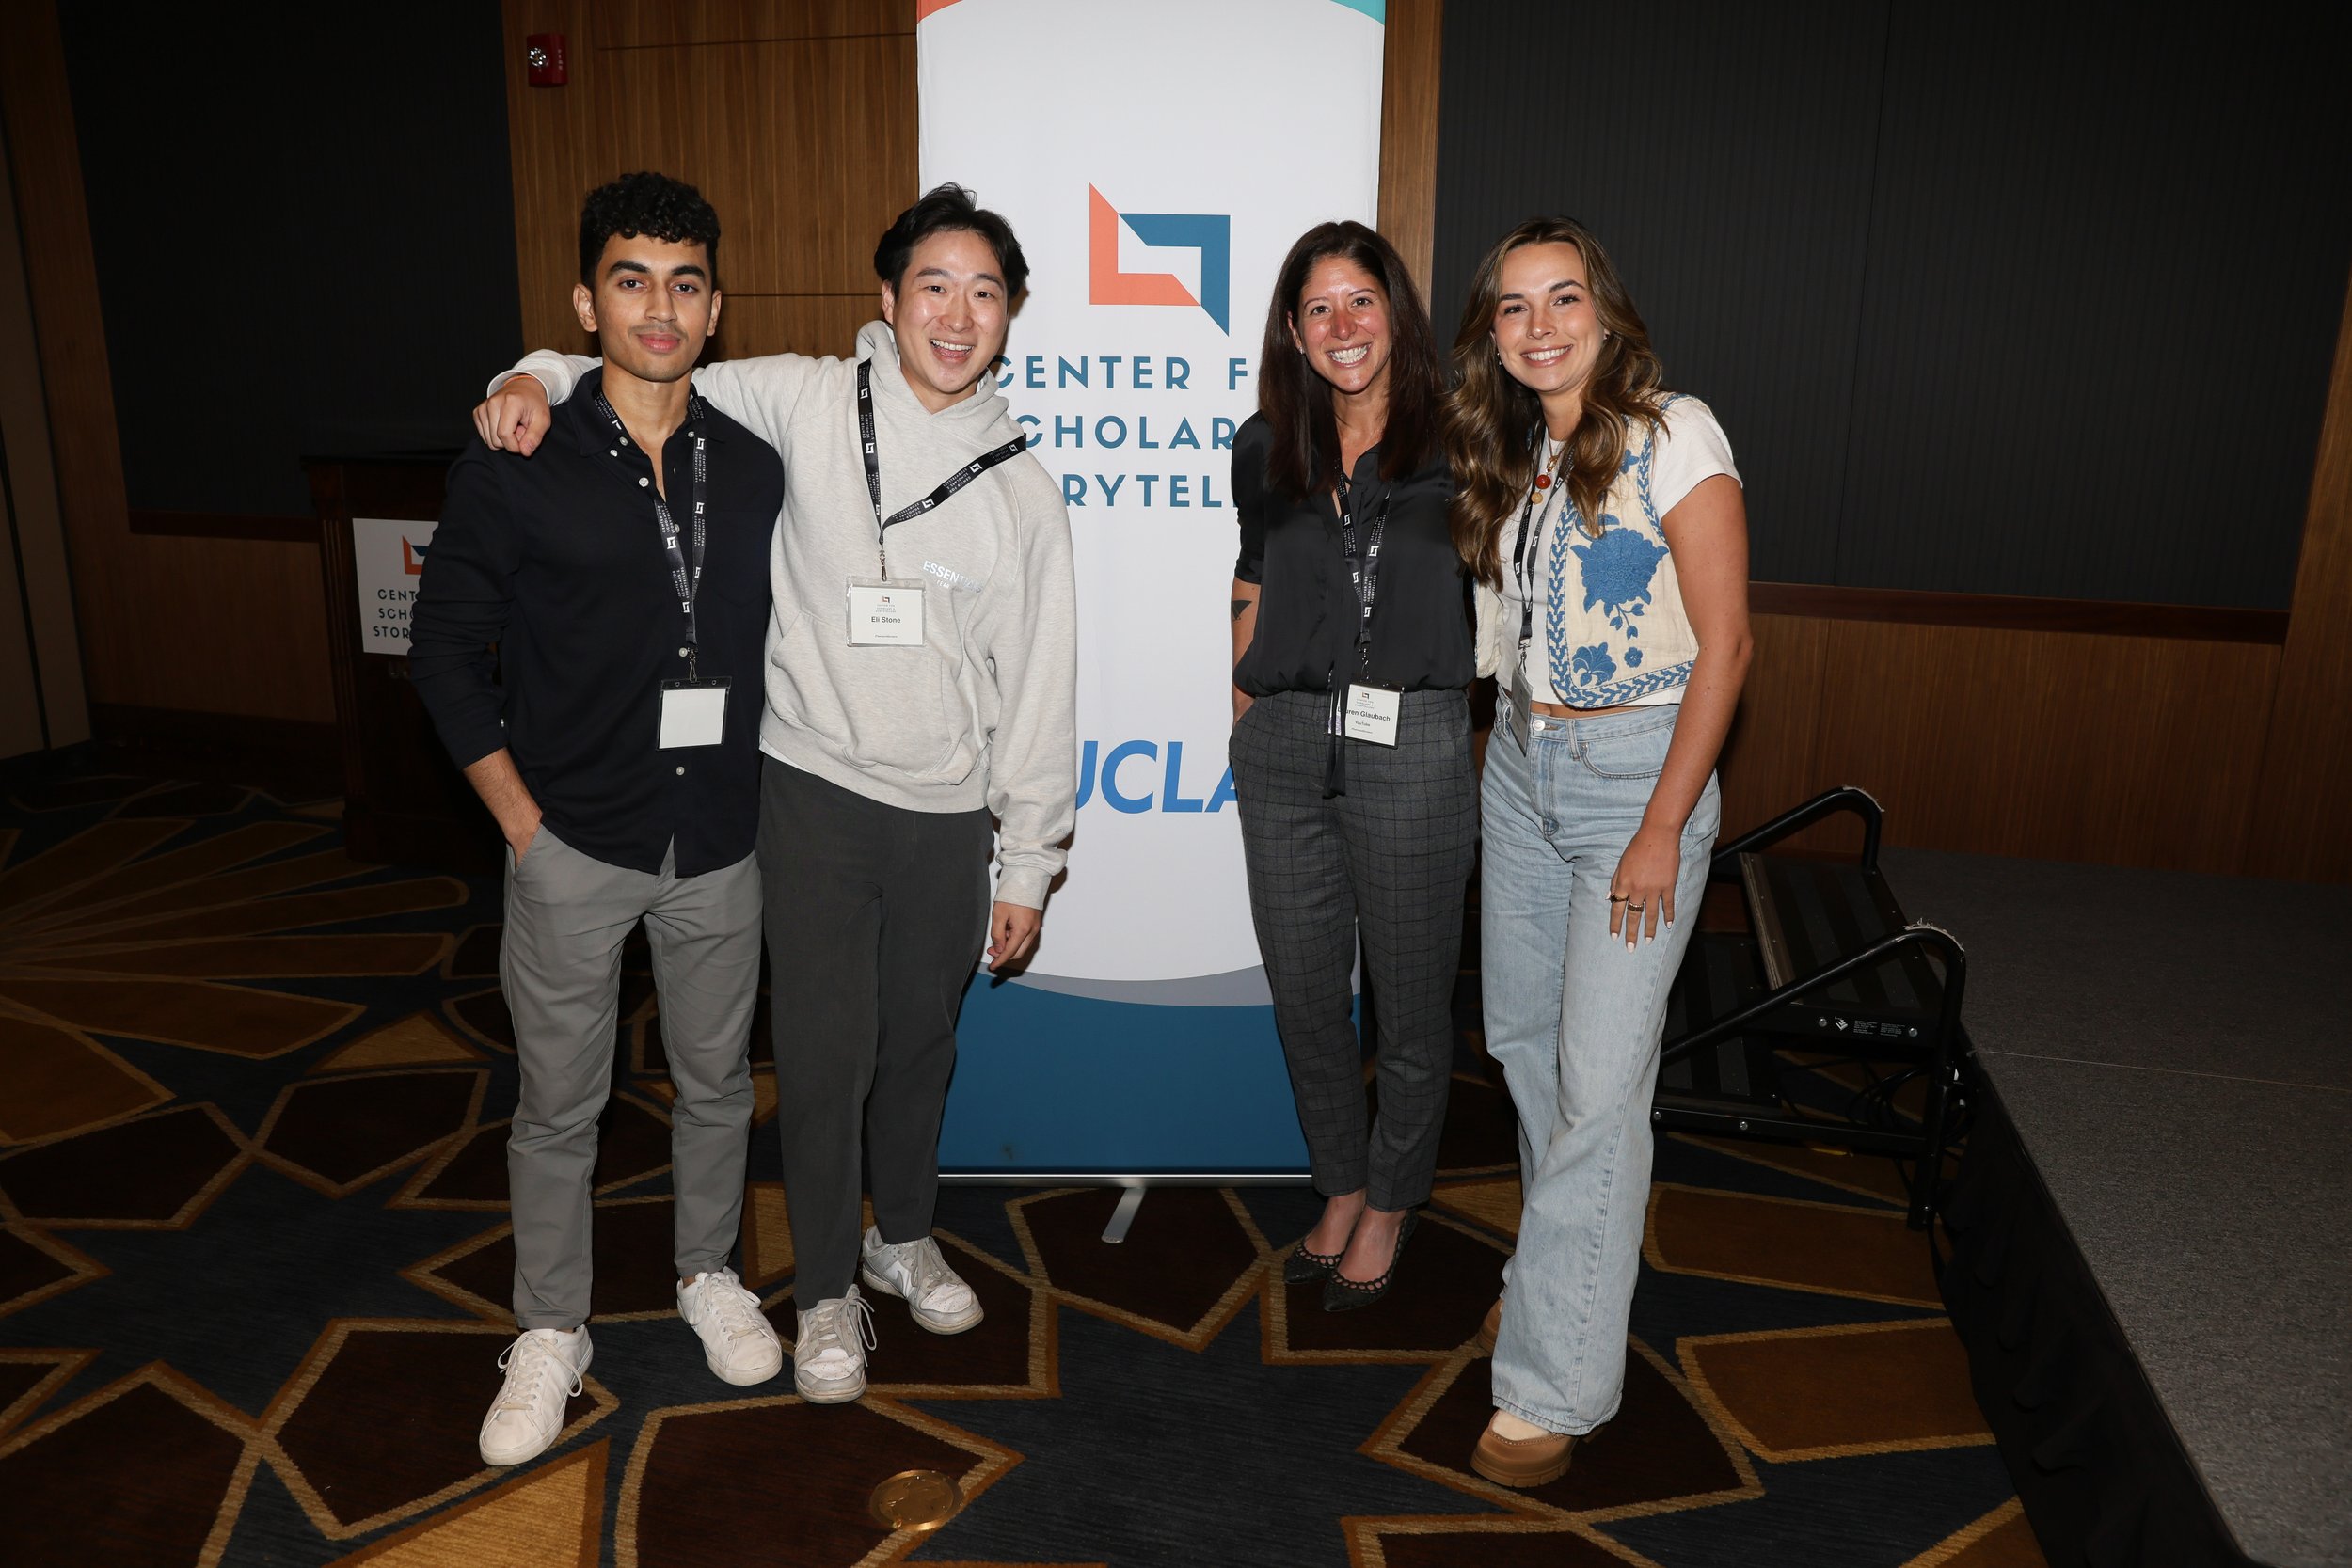  Real Talk: Behind the Screen with Top Creators Panelists- Gohar Khan (Content Creator), Eli Stone (Entrepreneur &amp; Content Creator), Lauren Glaubach (Director, Youtube) and Pierson Wodzynski (Content Creator) 